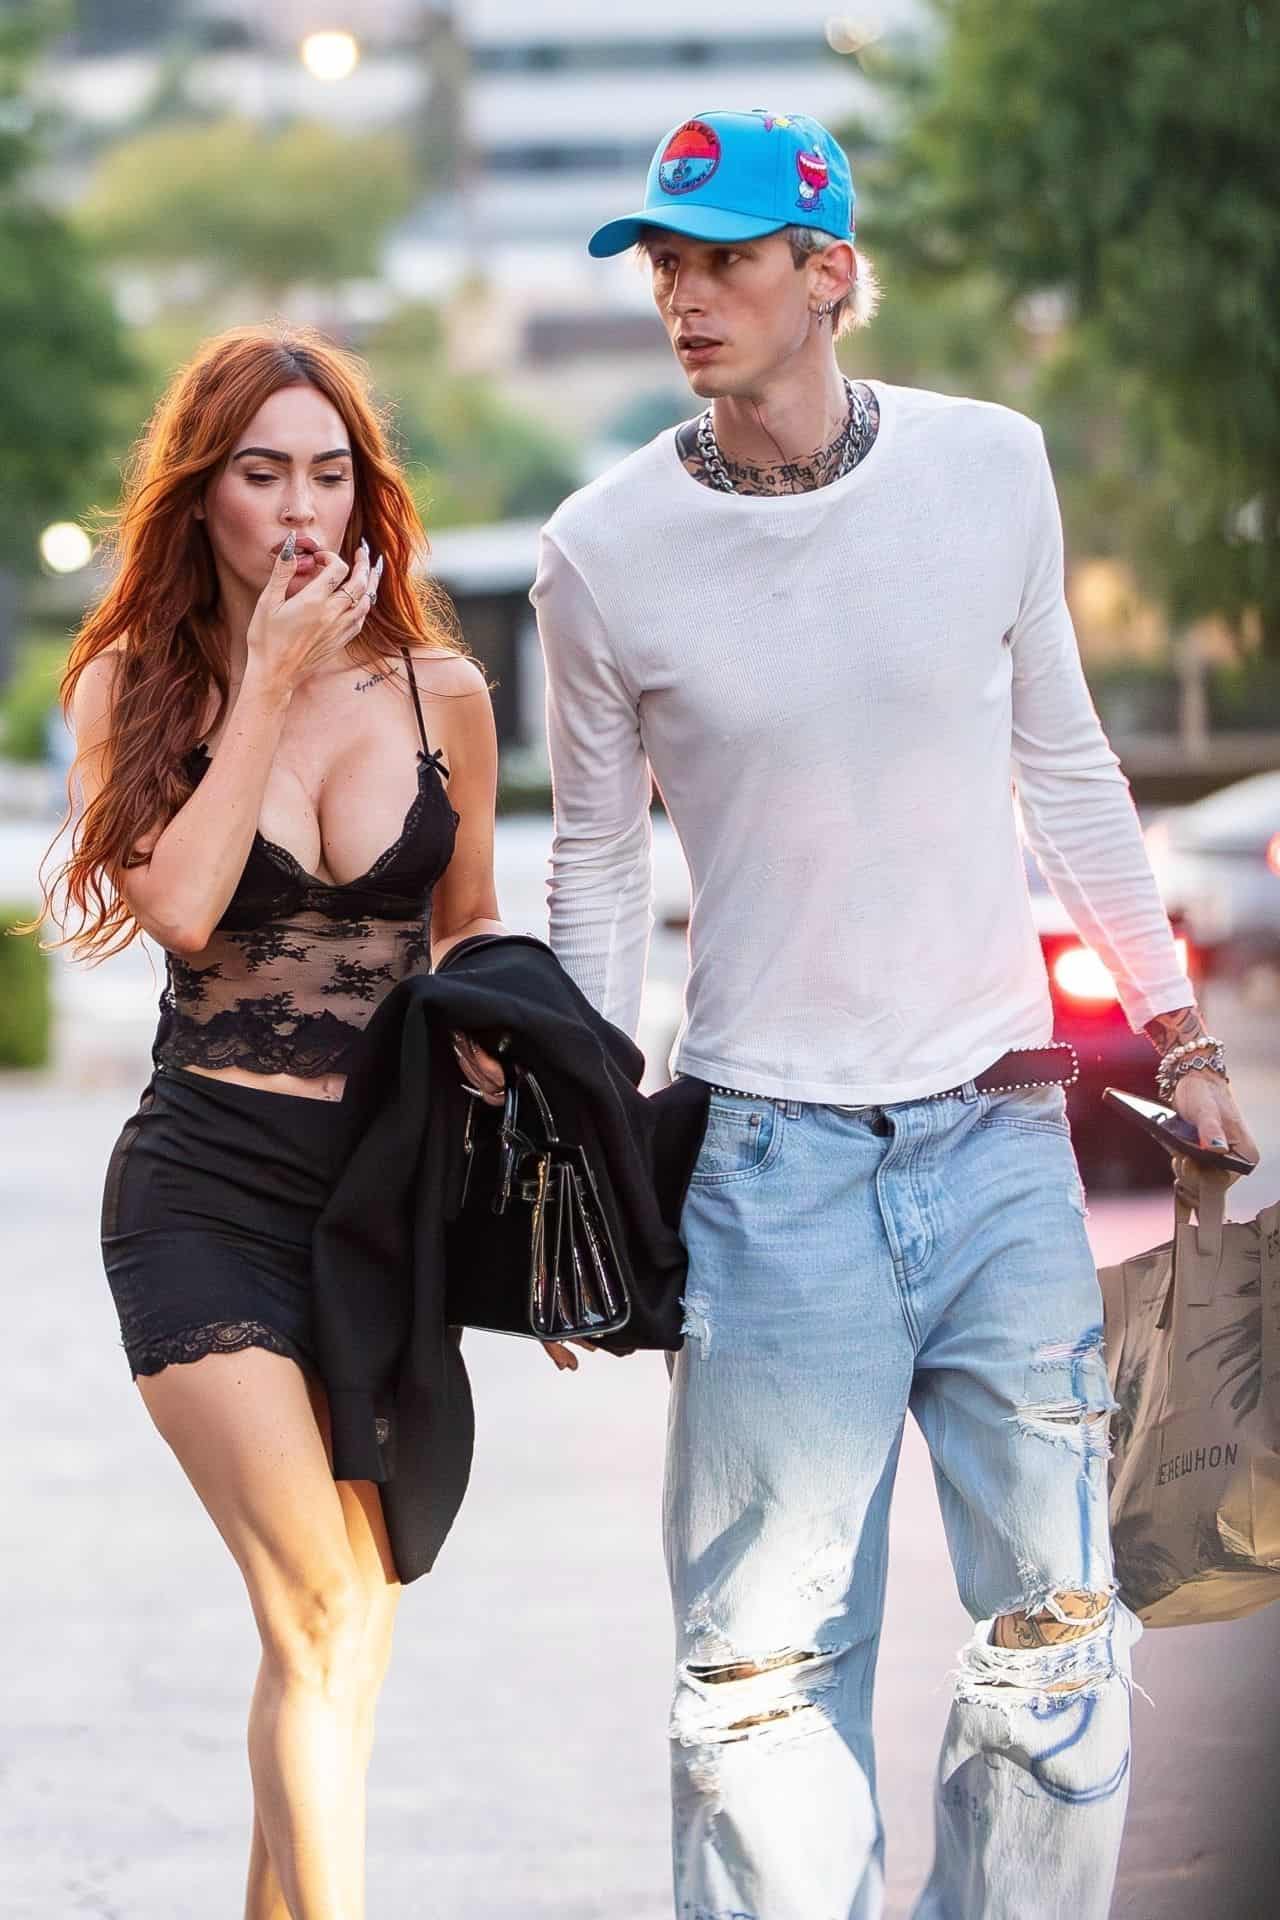 Megan Fox Puts on a Cleavage-Baring Display for Movie Date with MGK